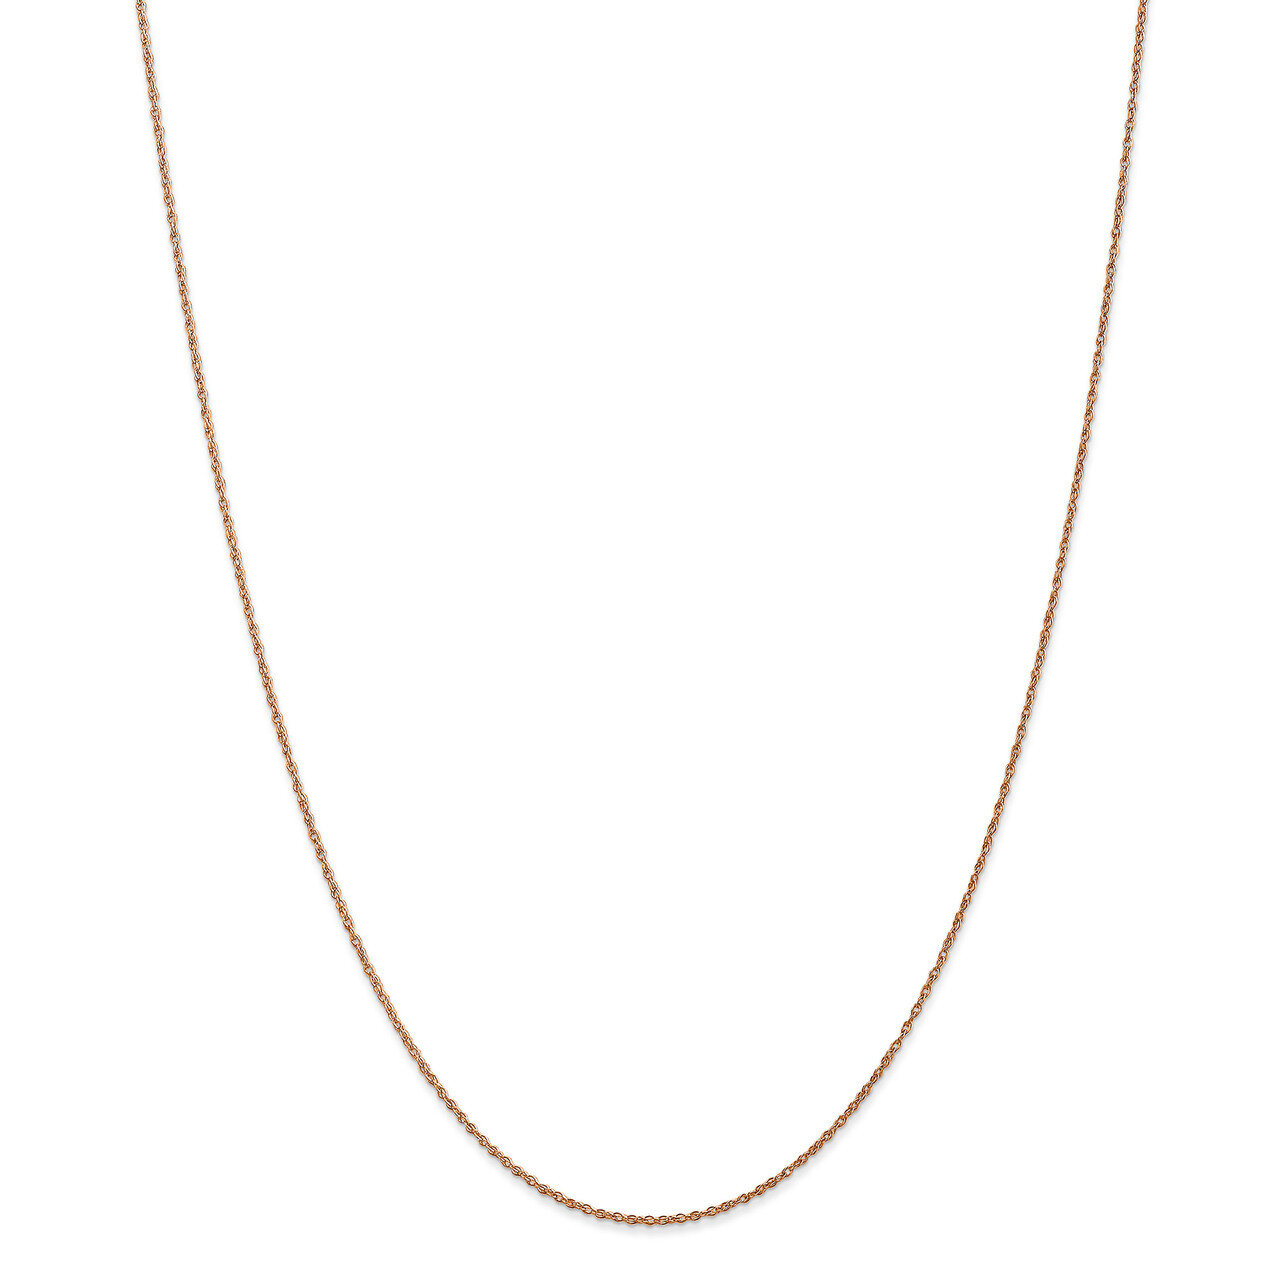 16 Inch 0.8mm Light-Baby Rope Chain 14k Rose Gold RSC35-16